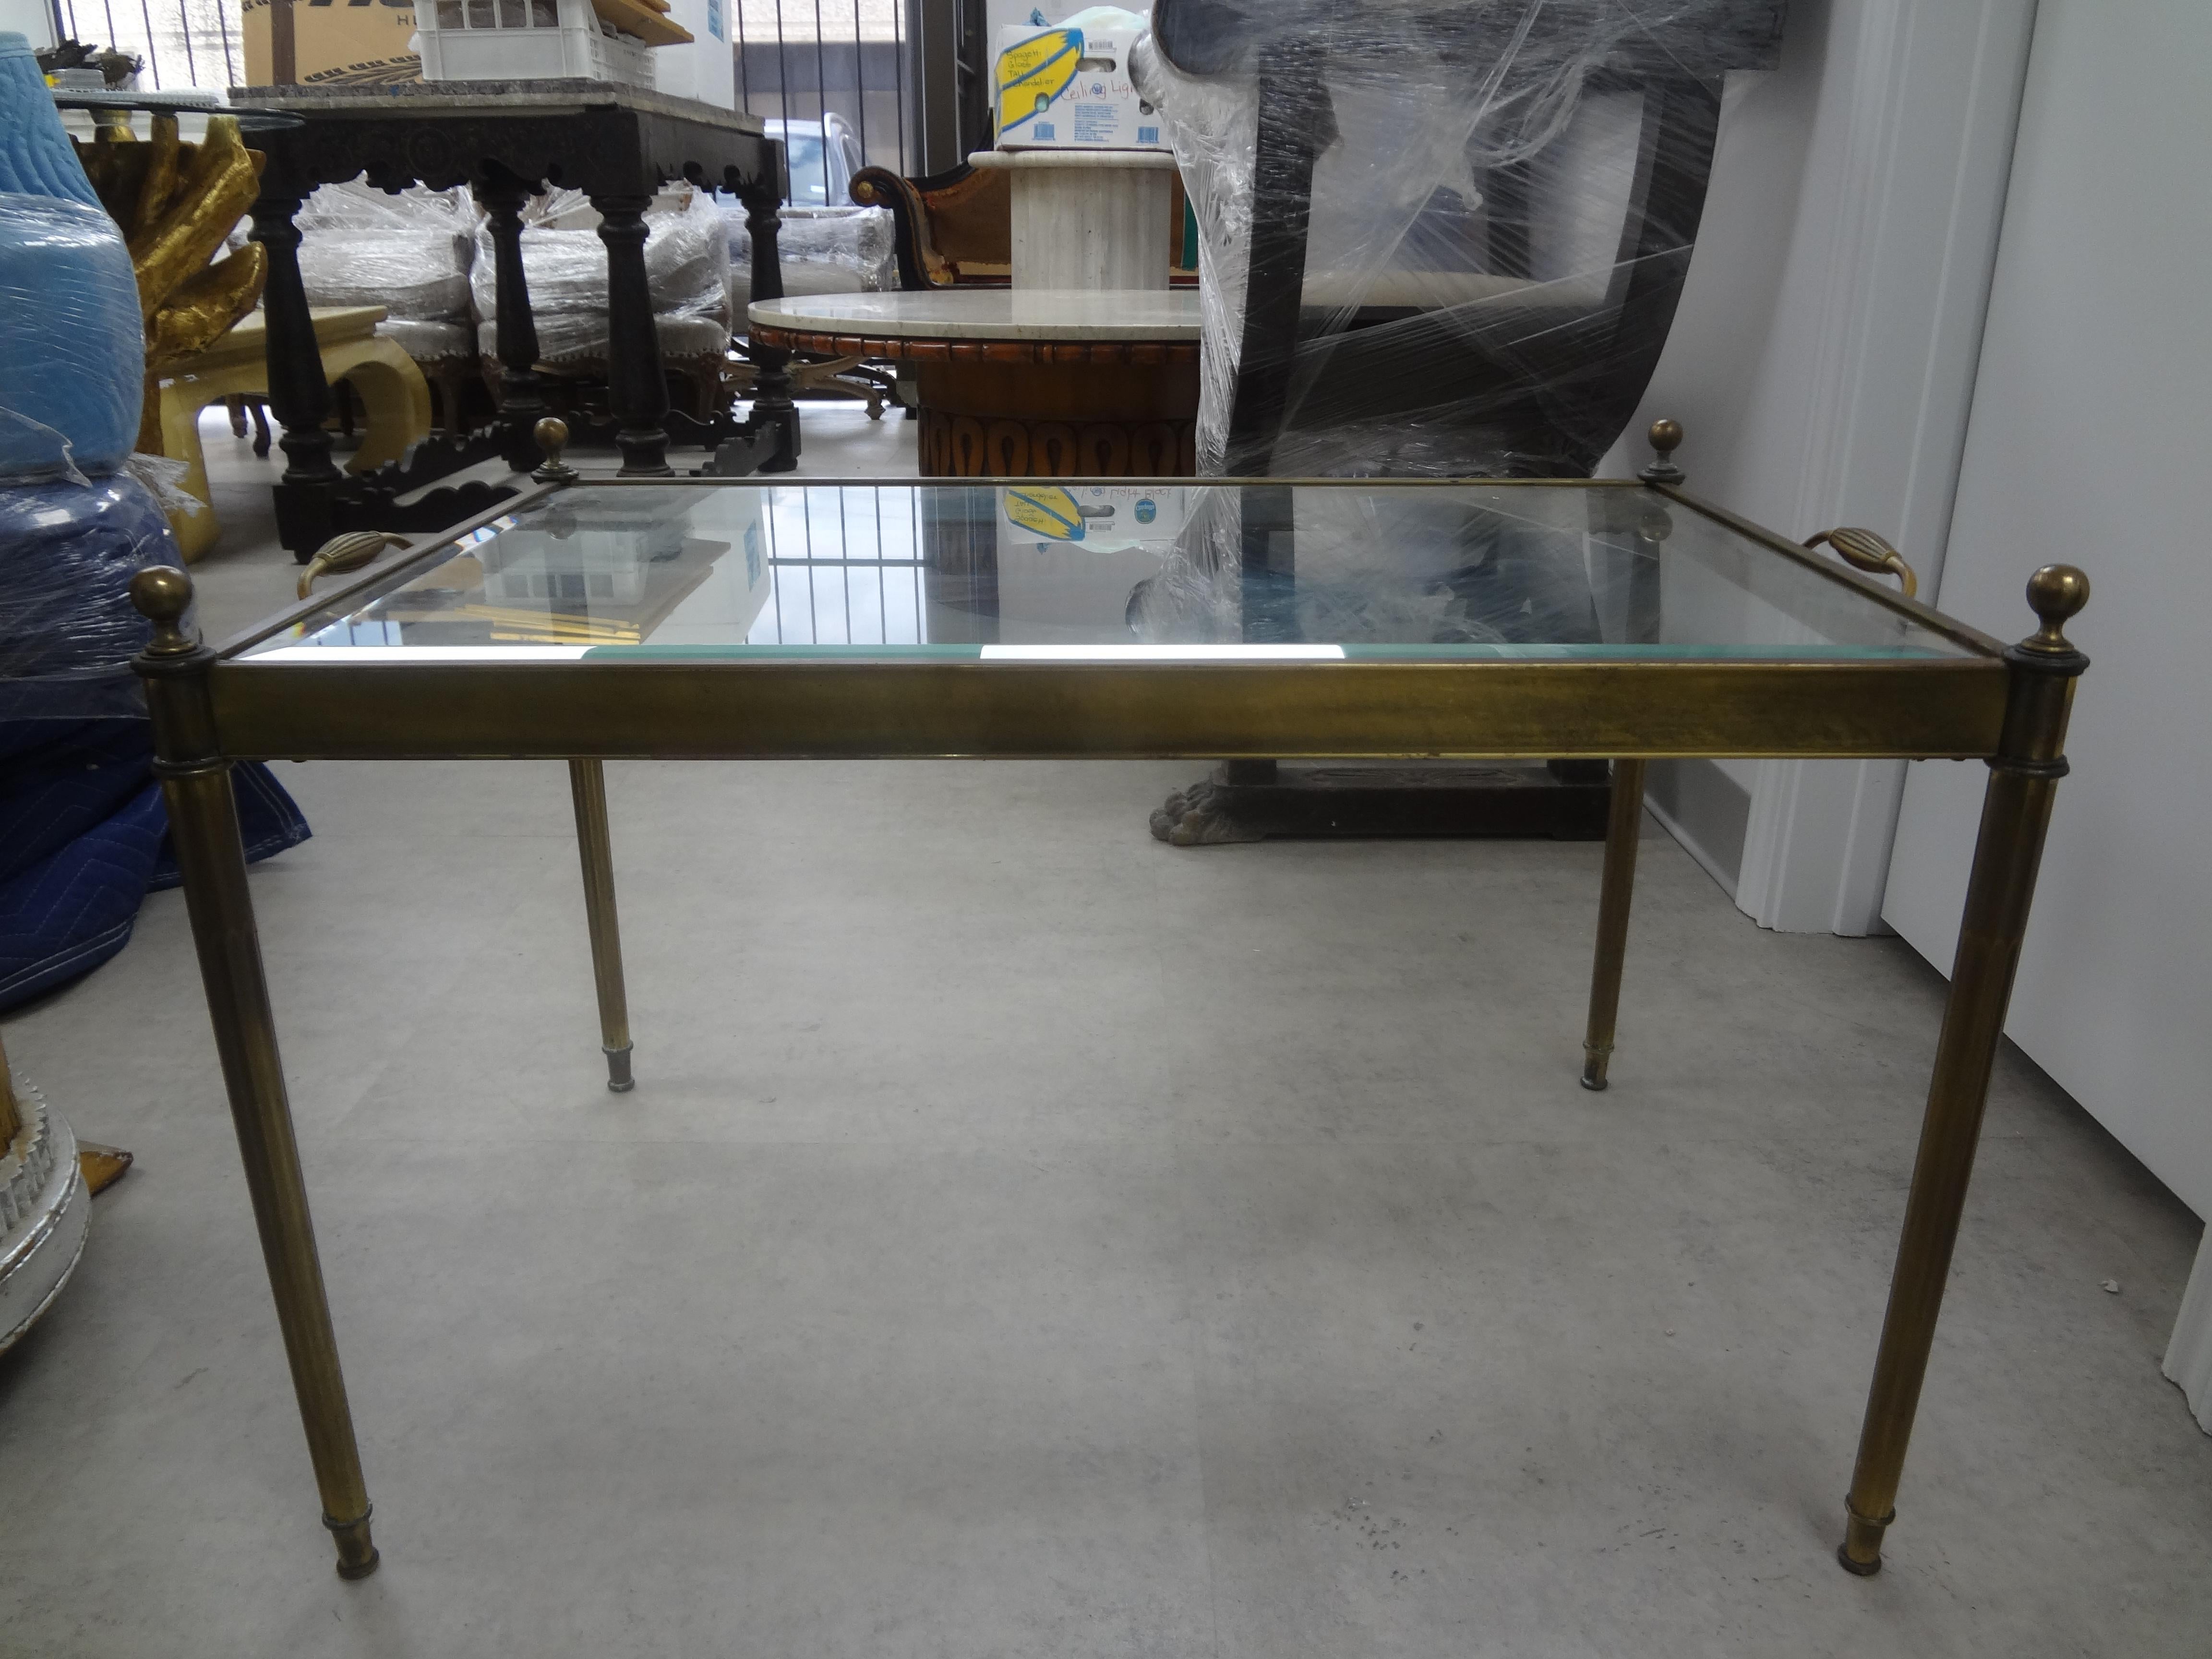 French Maison Bagues inspired Louis XVI style brass and glass coffee table.
Unusual French on Mansion Bagues inspired Louis XVI style brass coffee table with a beveled glass top. This gorgeous French cocktail table or side table has tray like